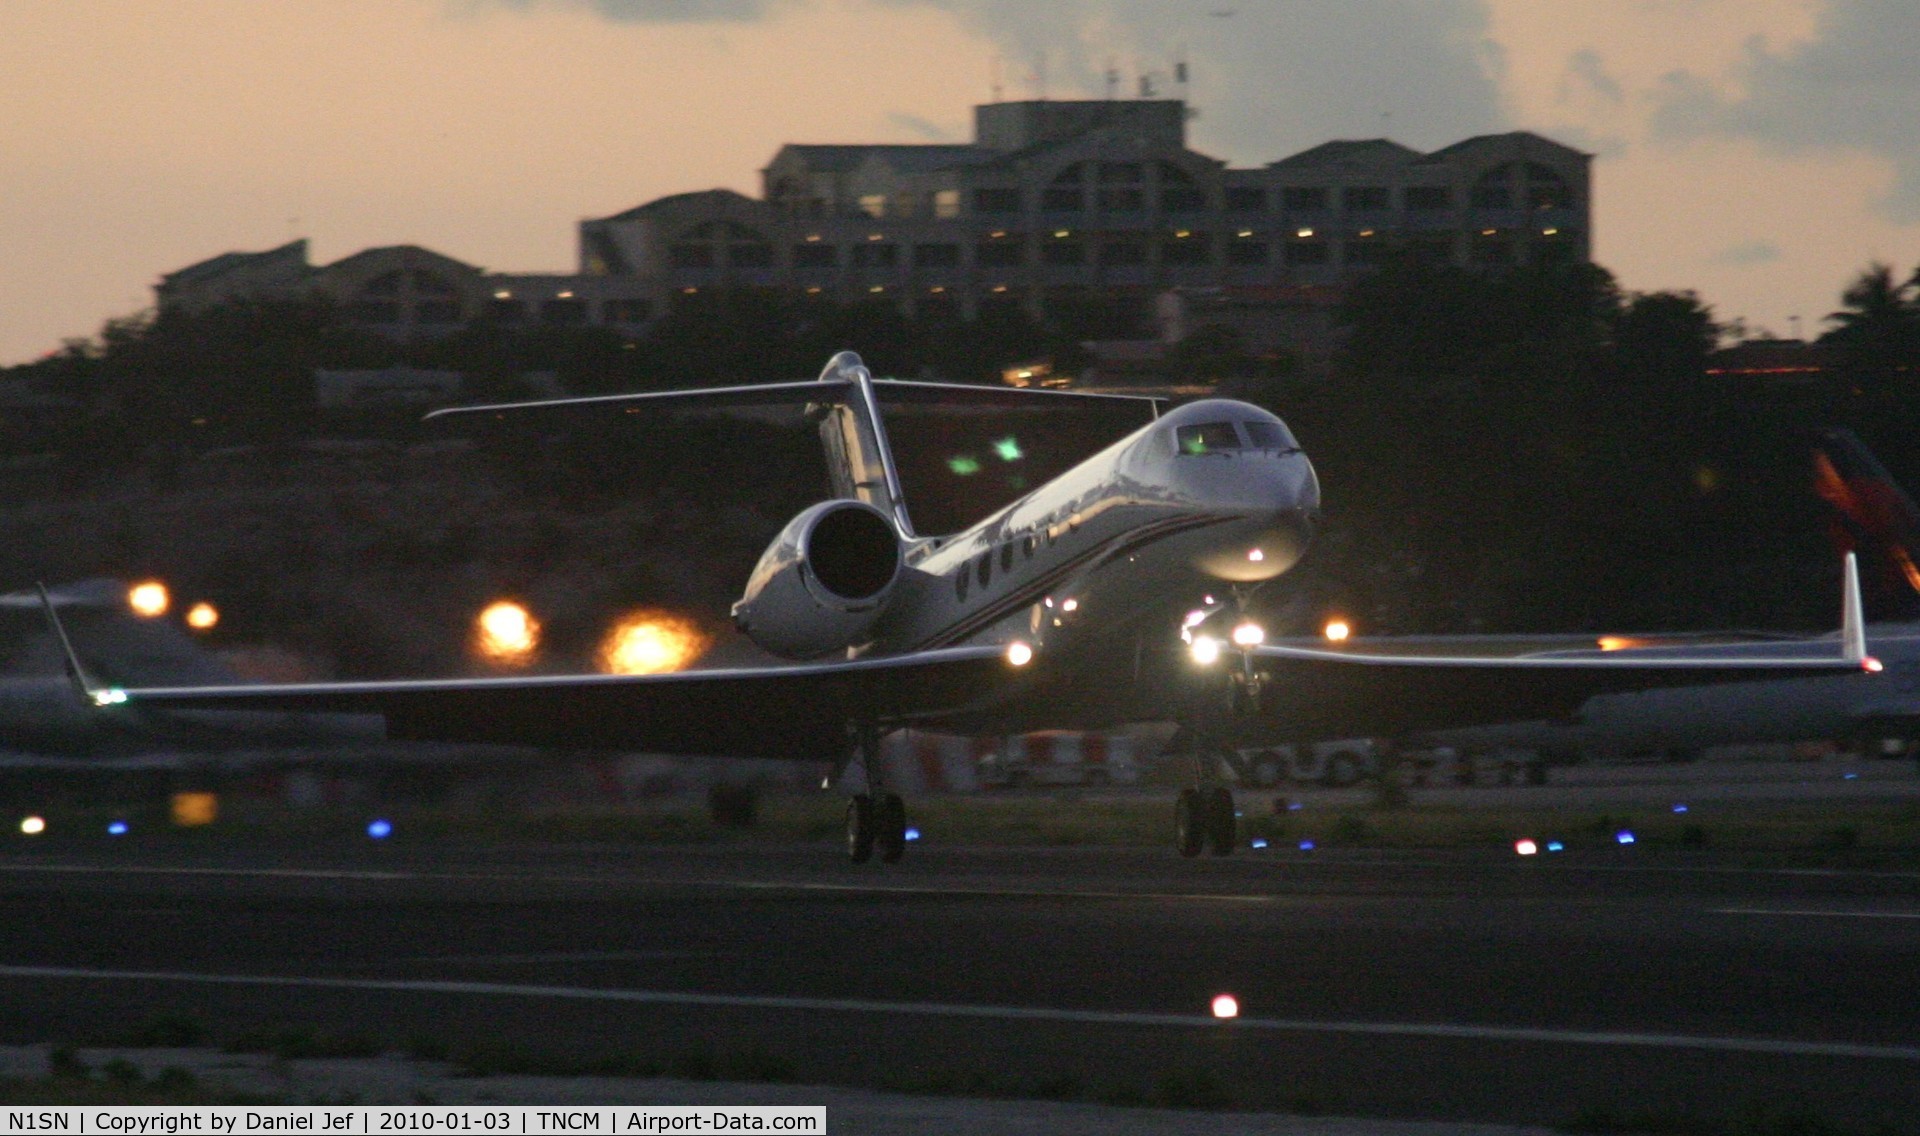 N1SN, 2000 Gulfstream Aerospace G-IV C/N 1433, N1SN on a late afternoon take off from TNCM